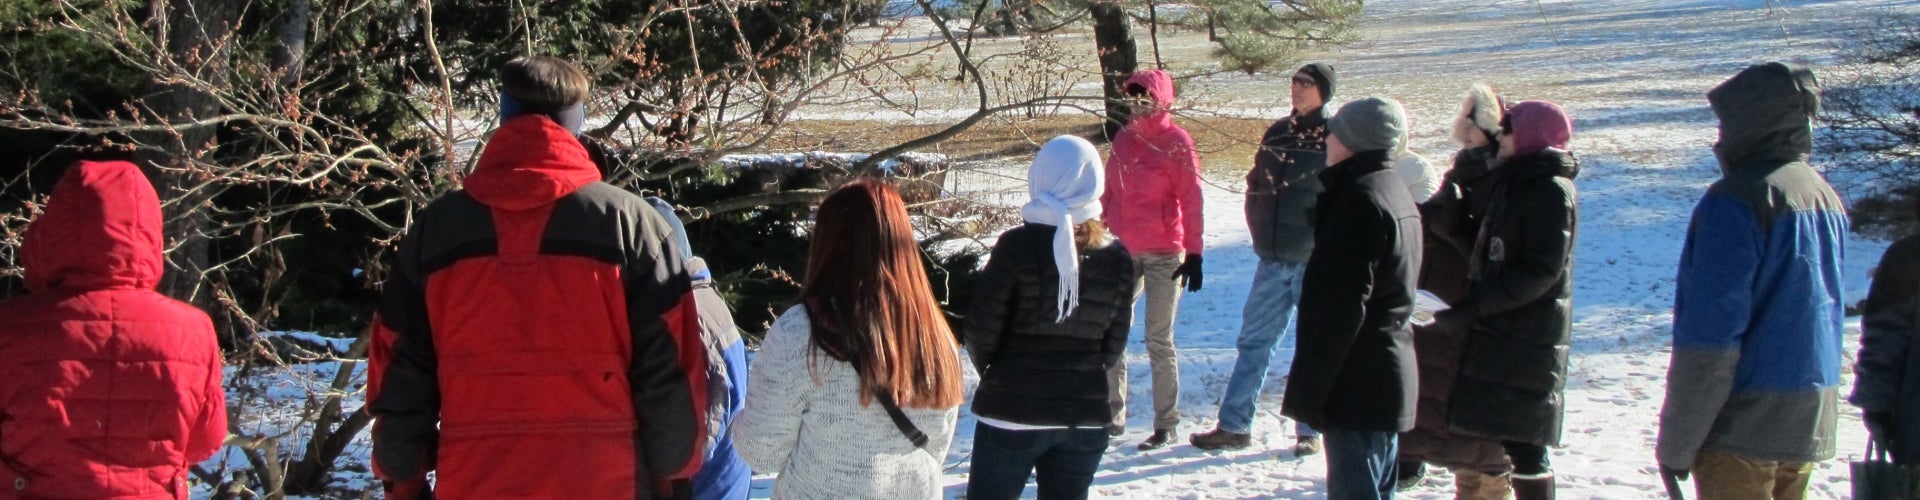 A group of people wearing winter coats taking a public garden tour in the snow.